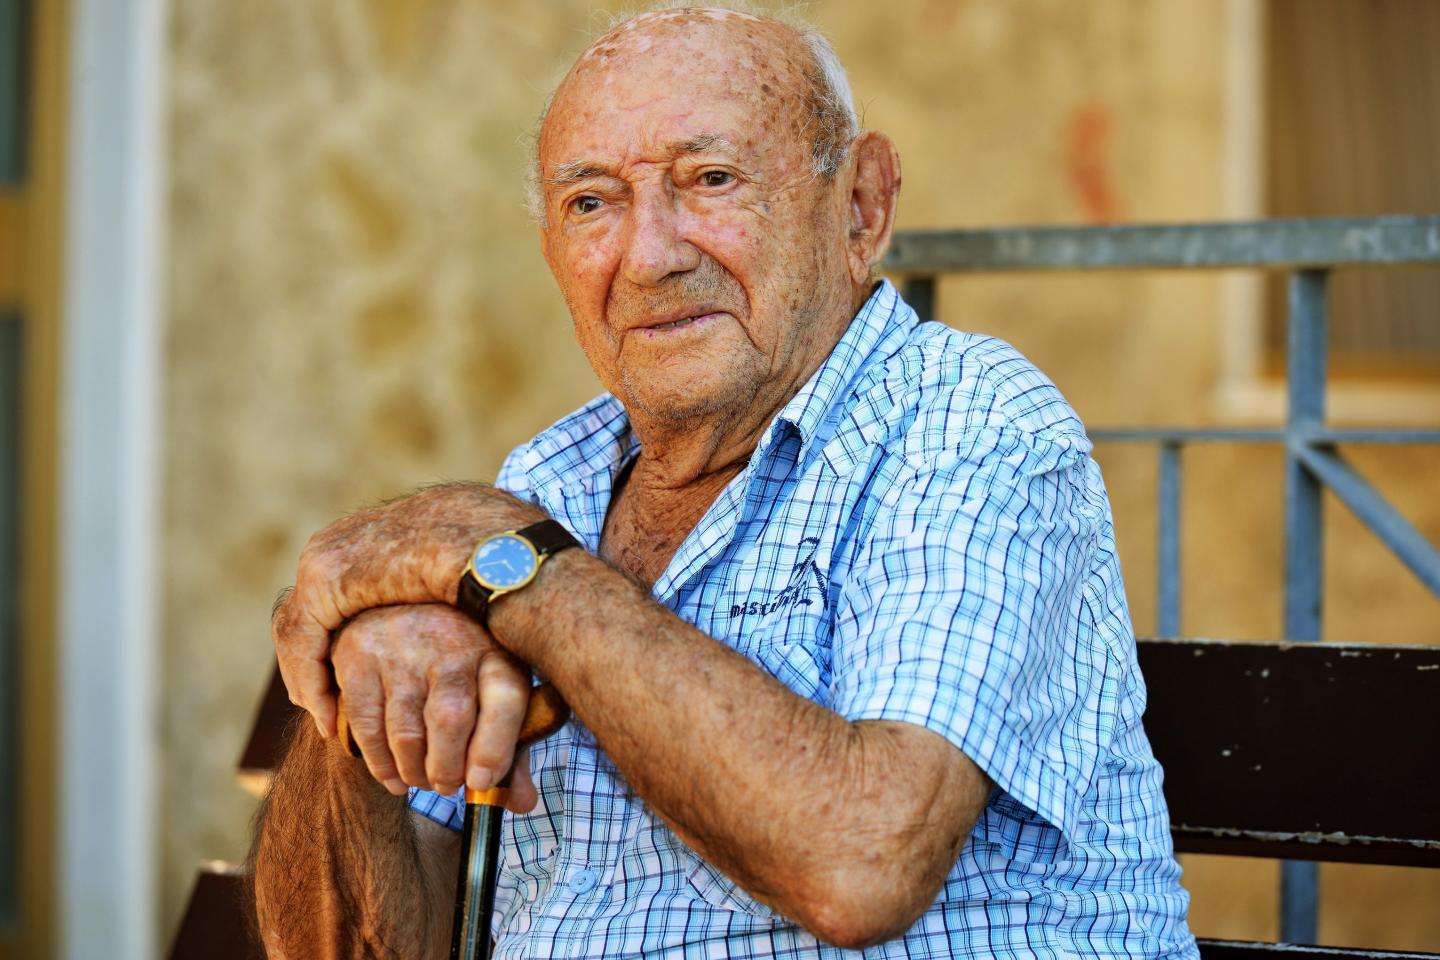 Participant (93) of the CIAO Study